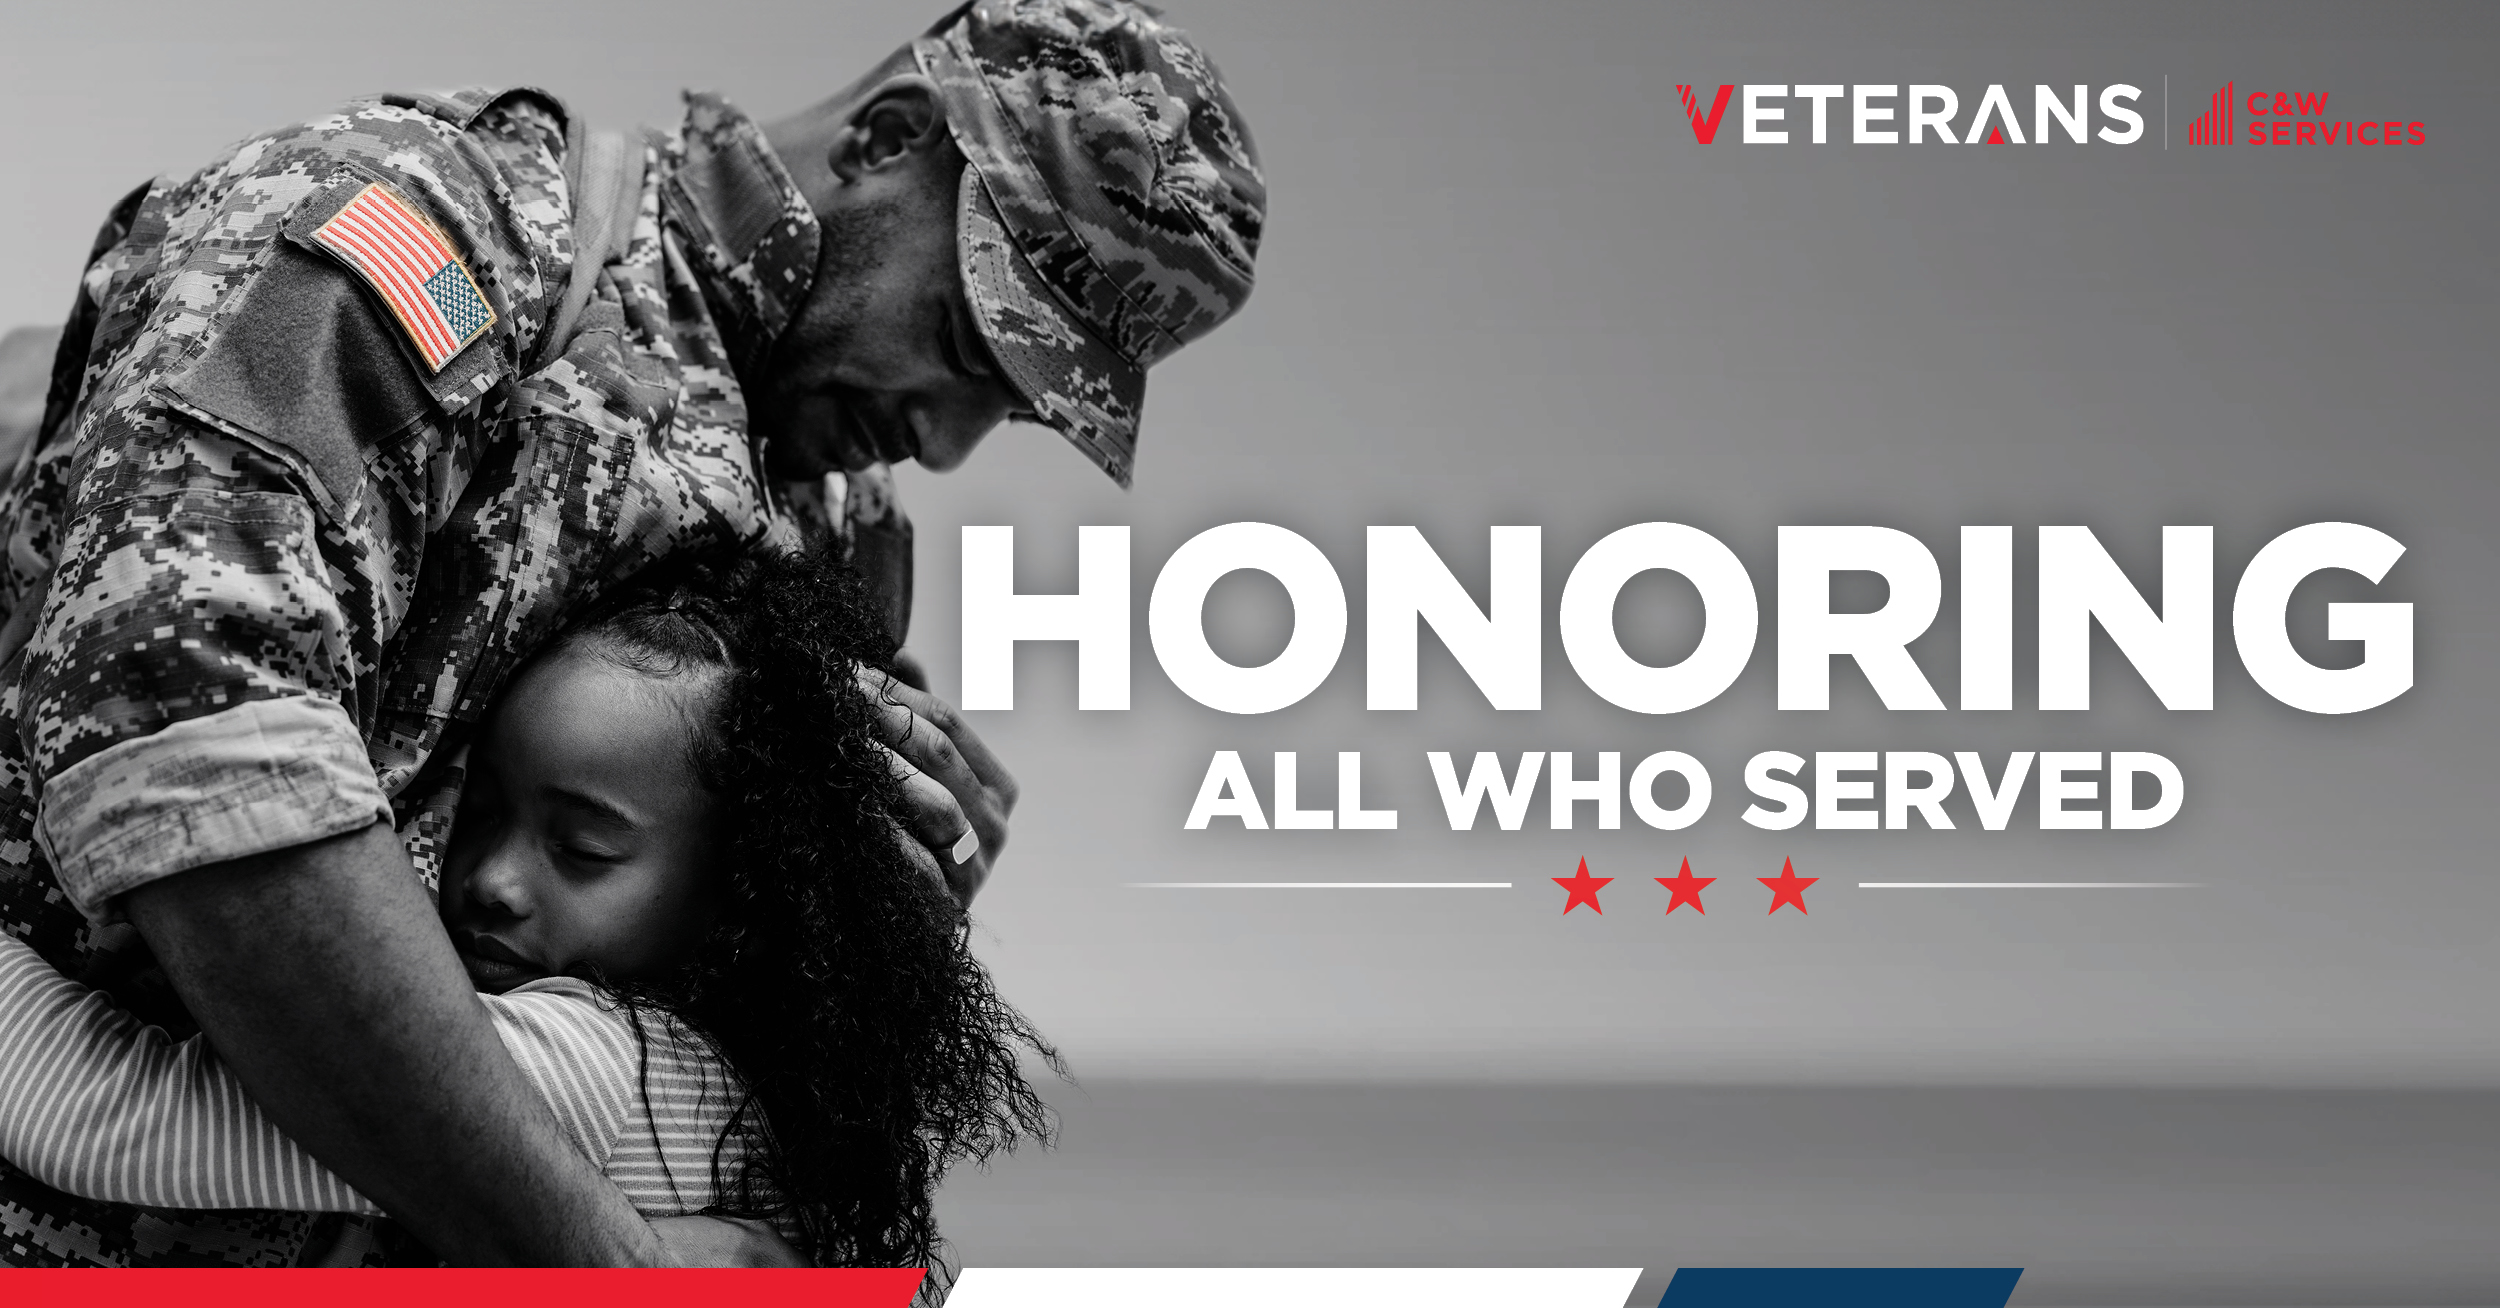 Veterans ERG and C&W Services: Honoring all who served